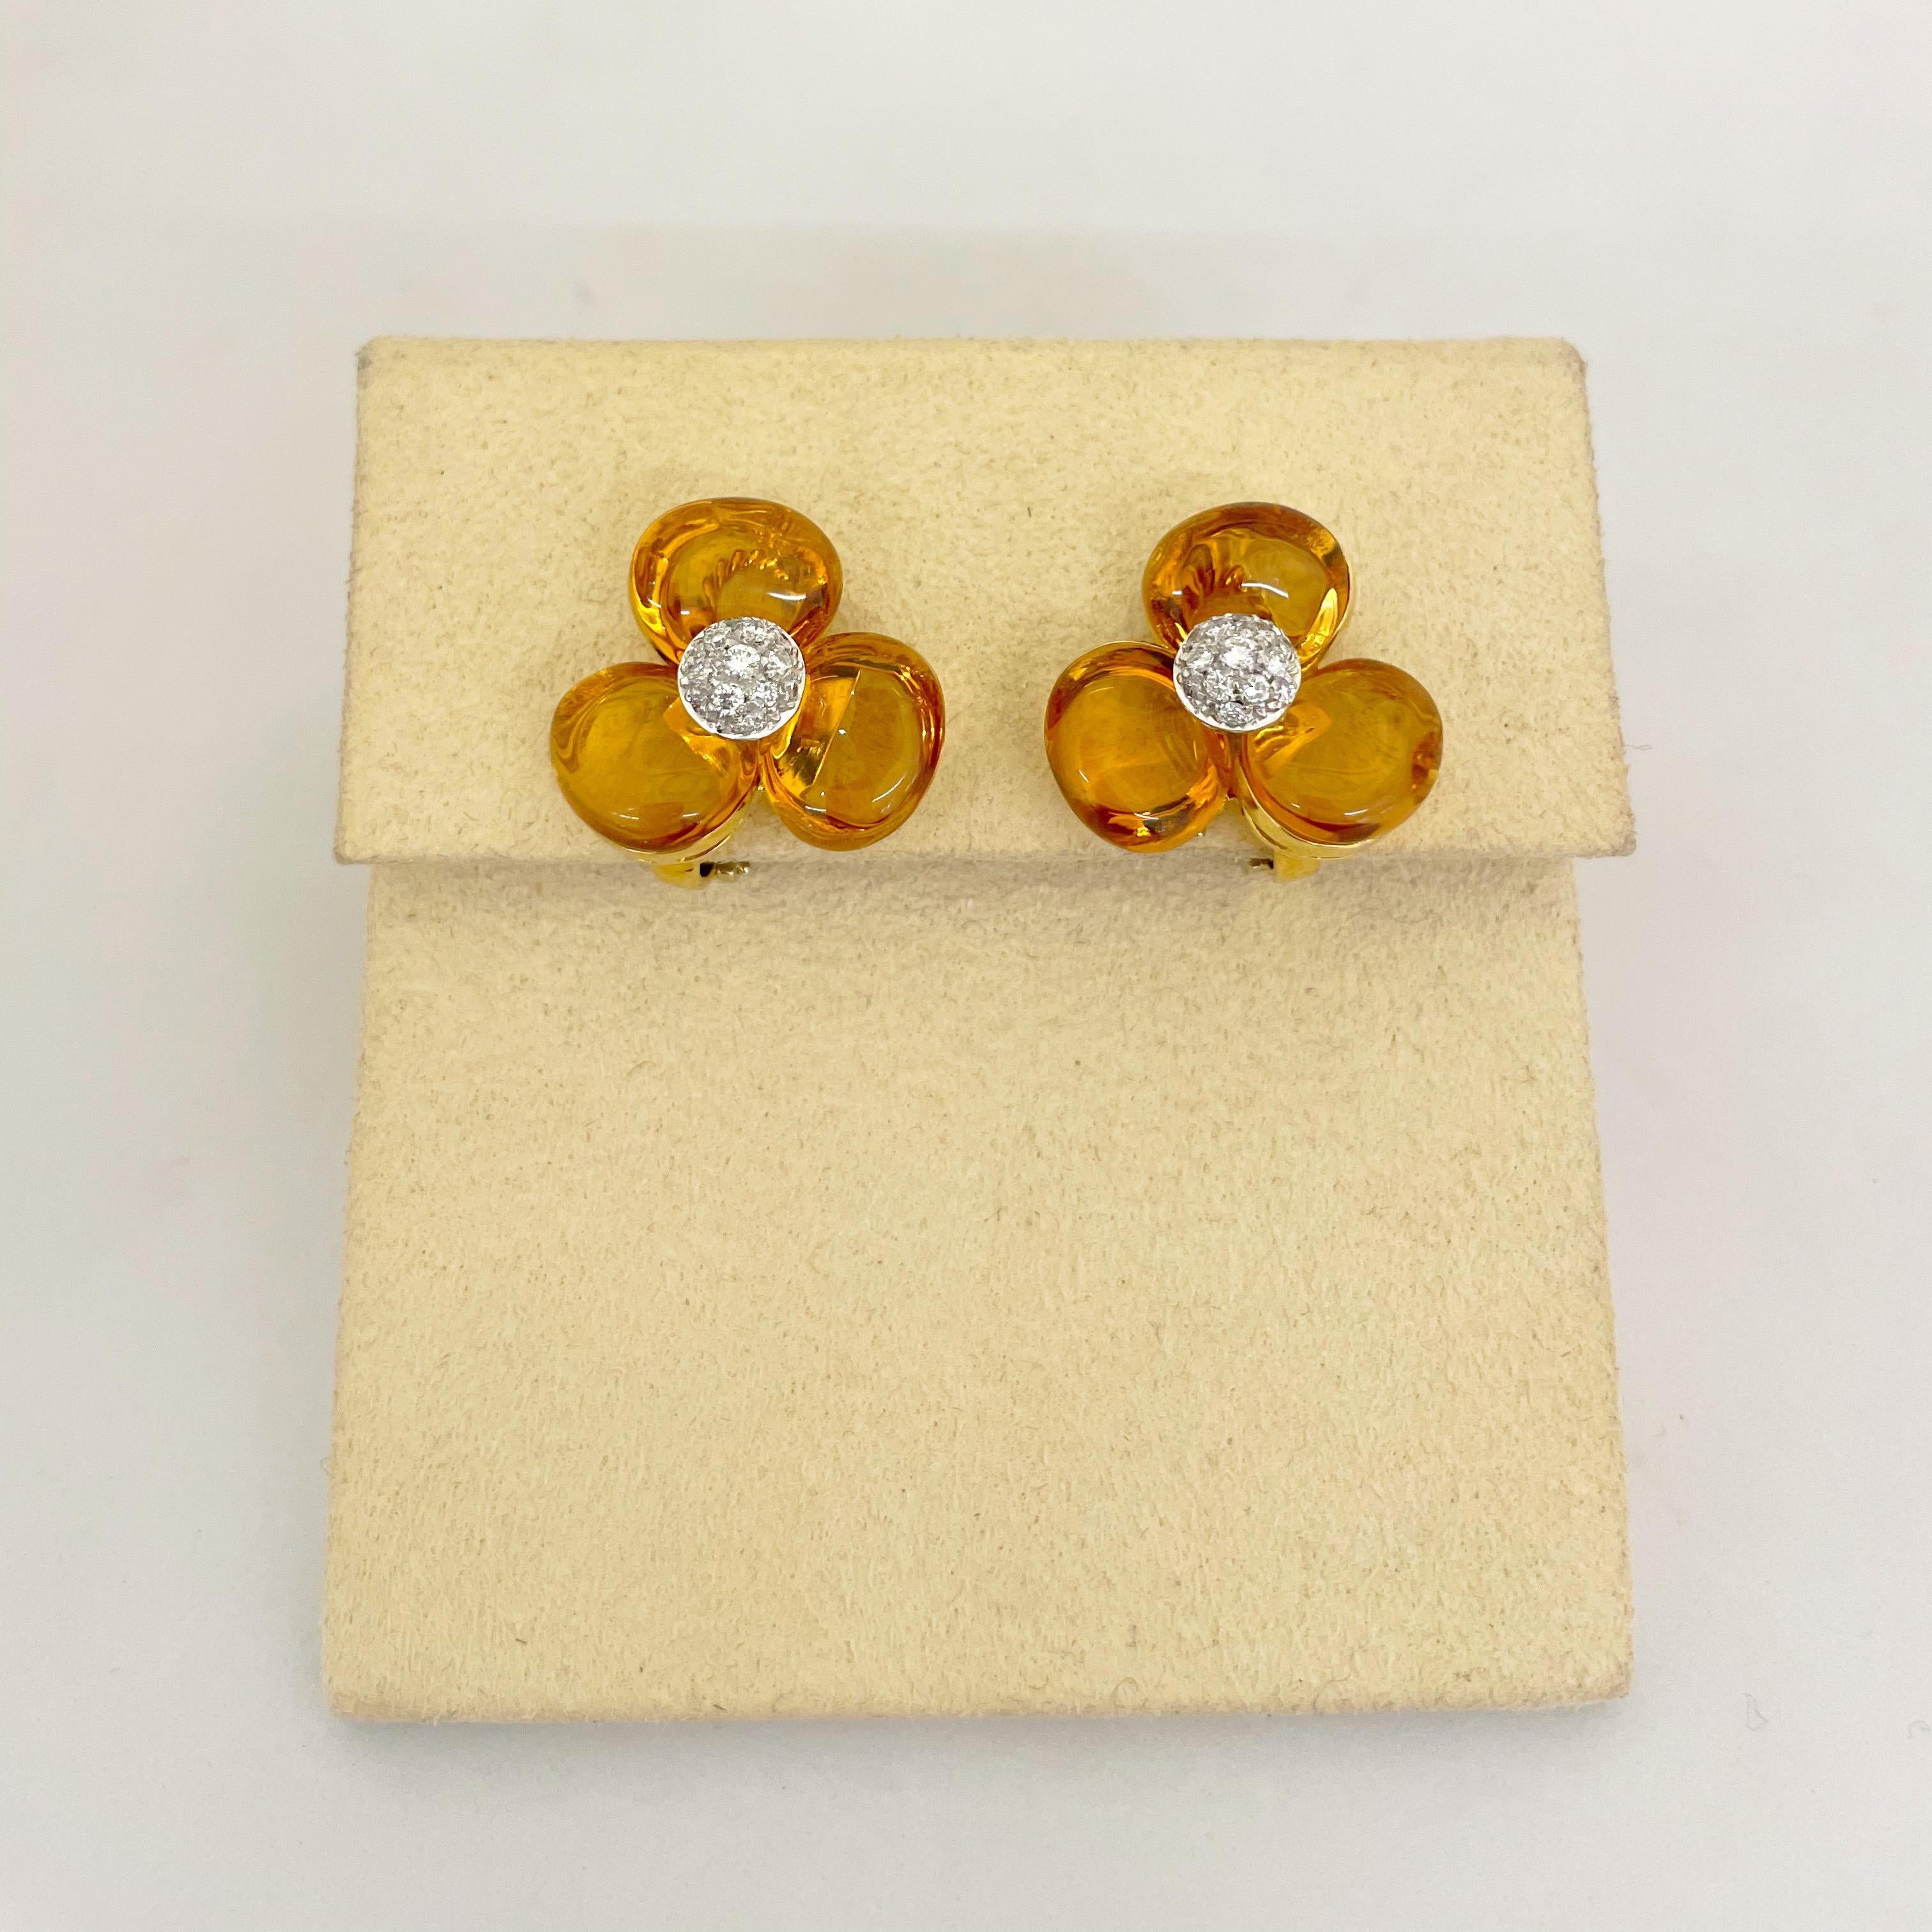 These lovely 18kt yellow gold flower earrings feature 3 beautiful cabochon citrine petals with a pave diamond center, providing just the right amount of sparkle to enhance the natural beauty of the citrine. 
Stamped Cellini 450 Made in Italy 